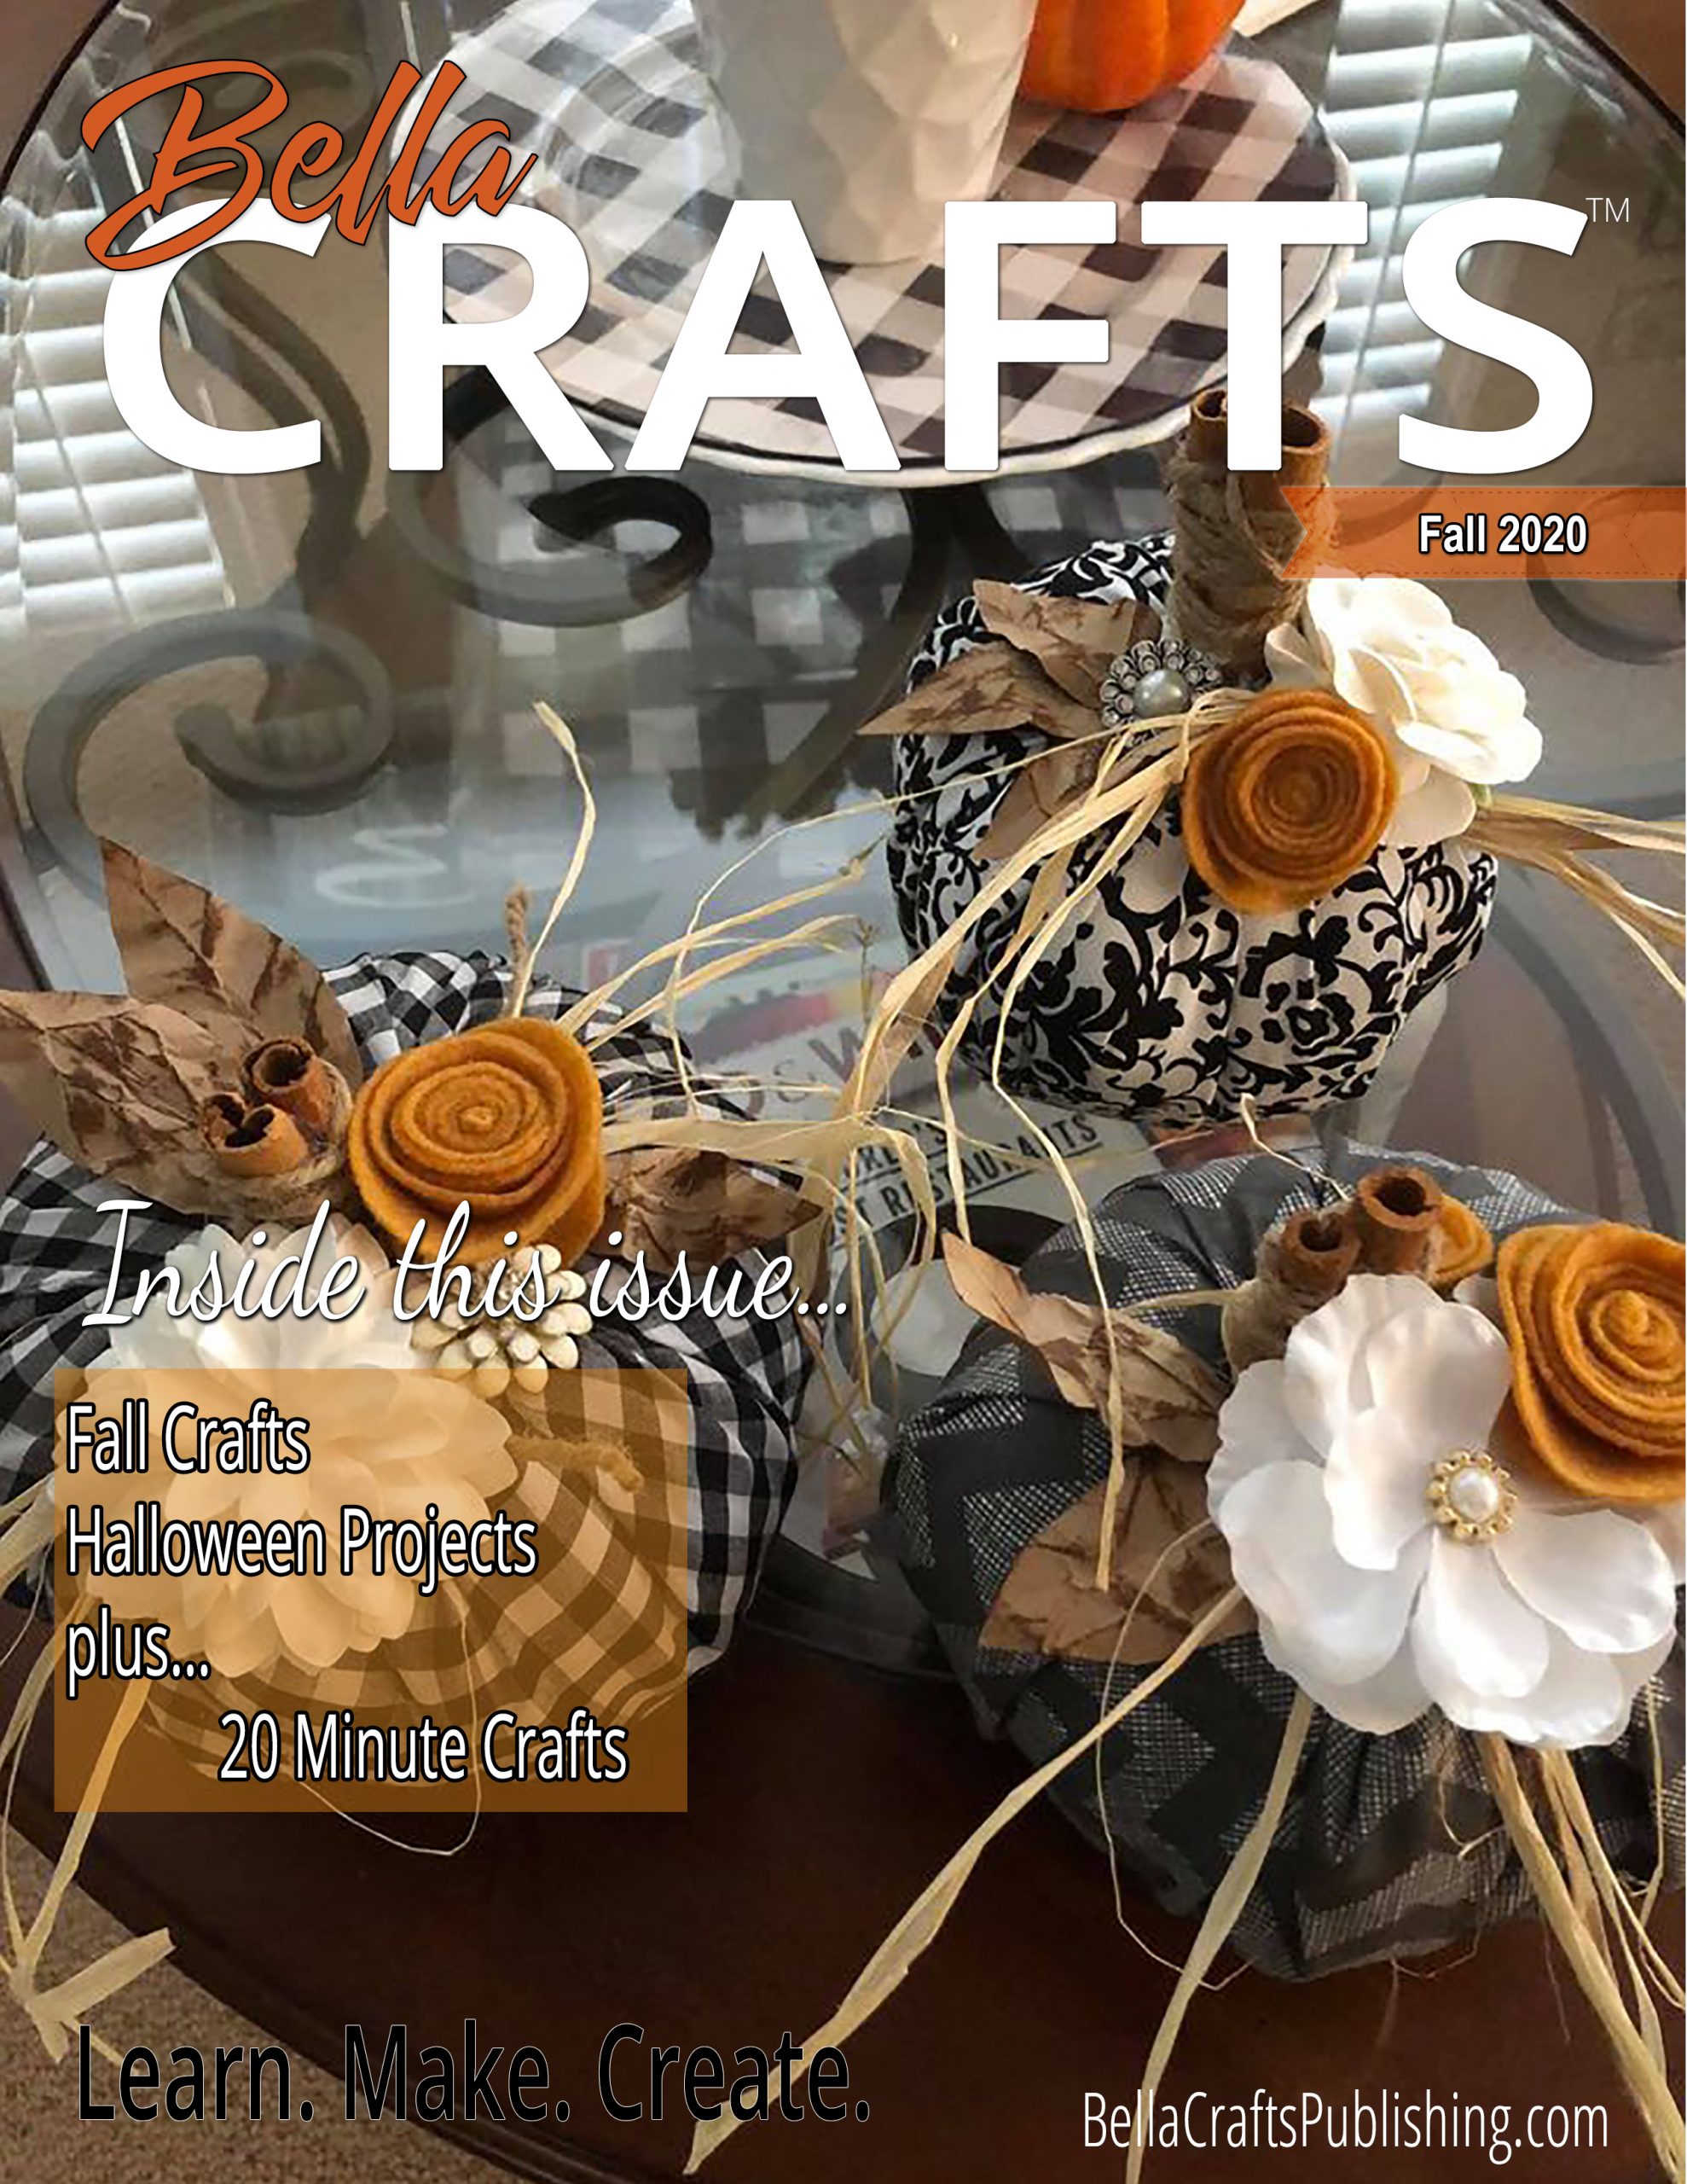 Bella Crafts Fall 2020 Issue is Available